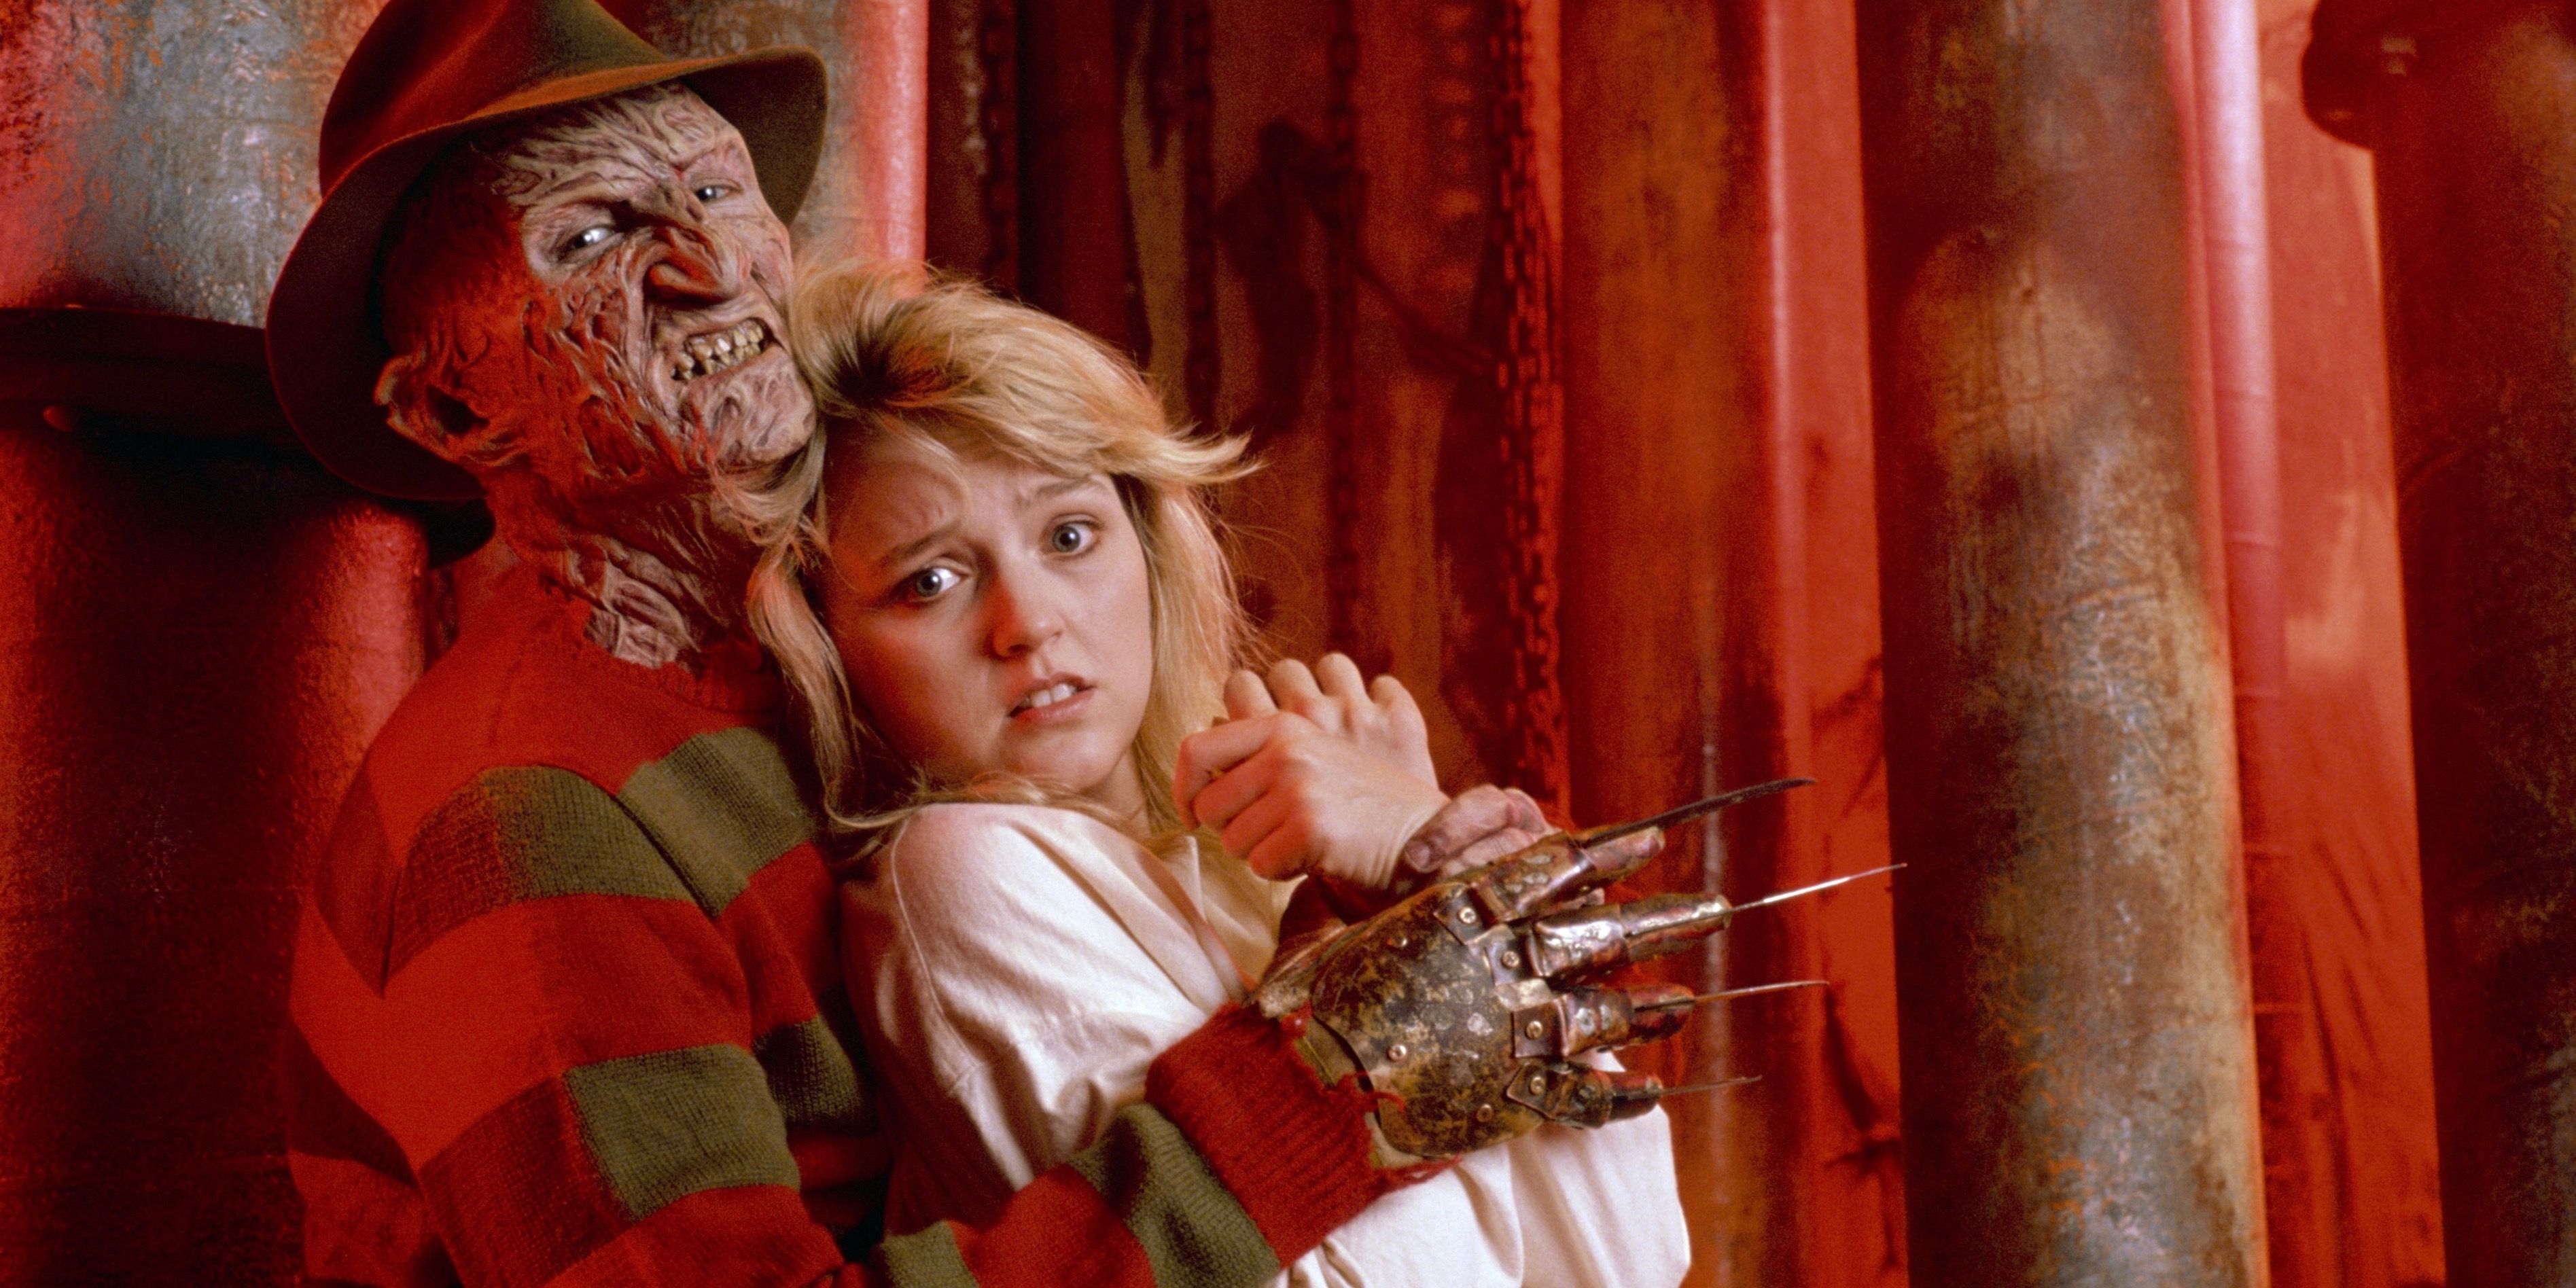 Robert Englund as Freddy Krueger and Tuesday Knight as Kristen in A Nightmare on Elm Street 4 The Dream Master